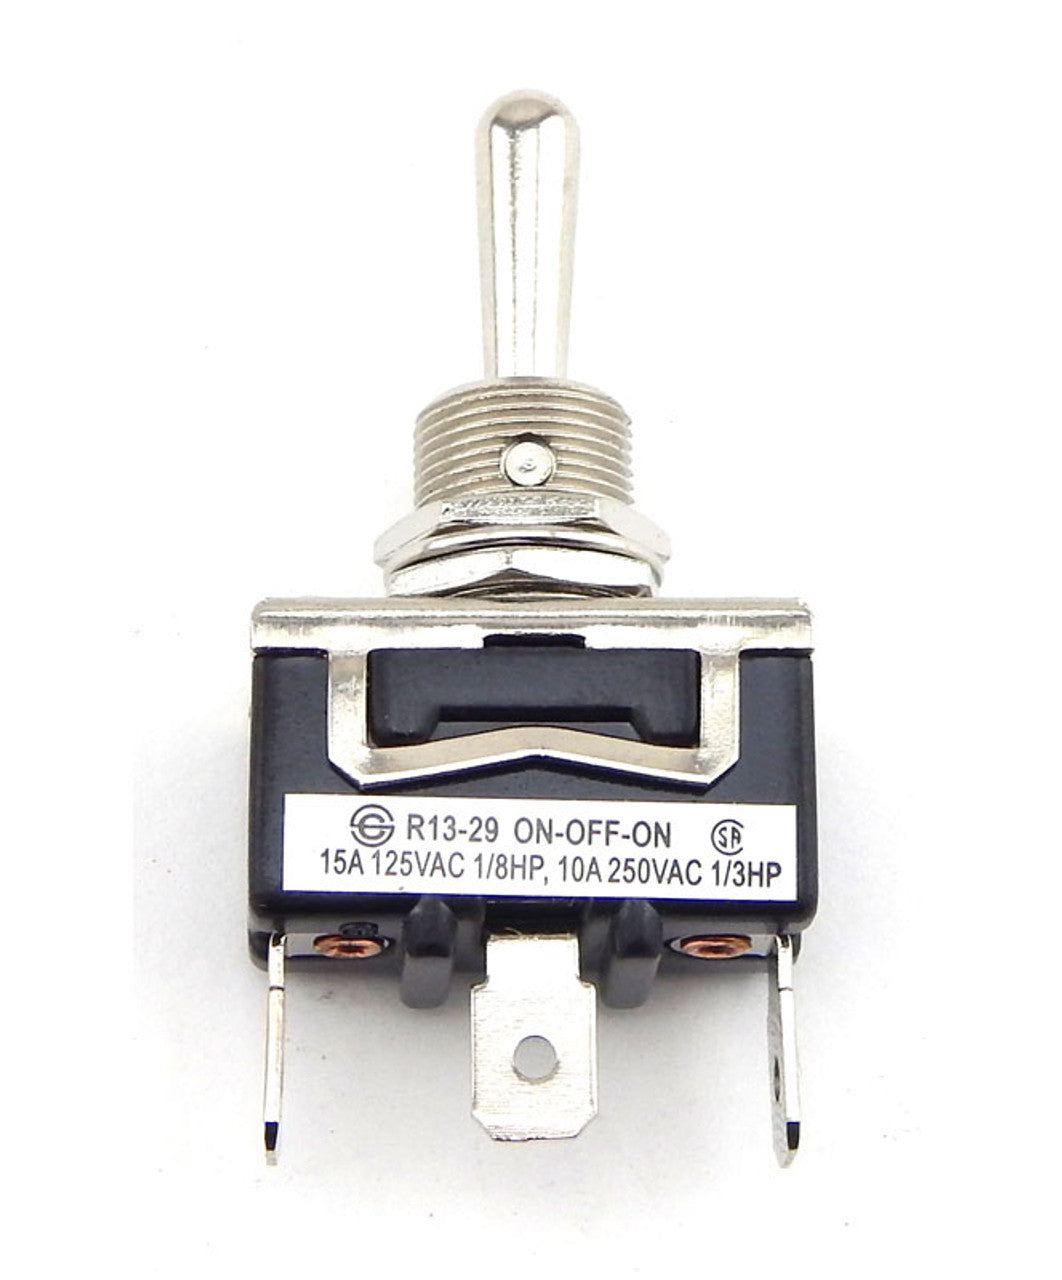 BEP Marine Waterproof Series Accessory - On/Off/On - 12V 20A Toggle Switch SW-32114